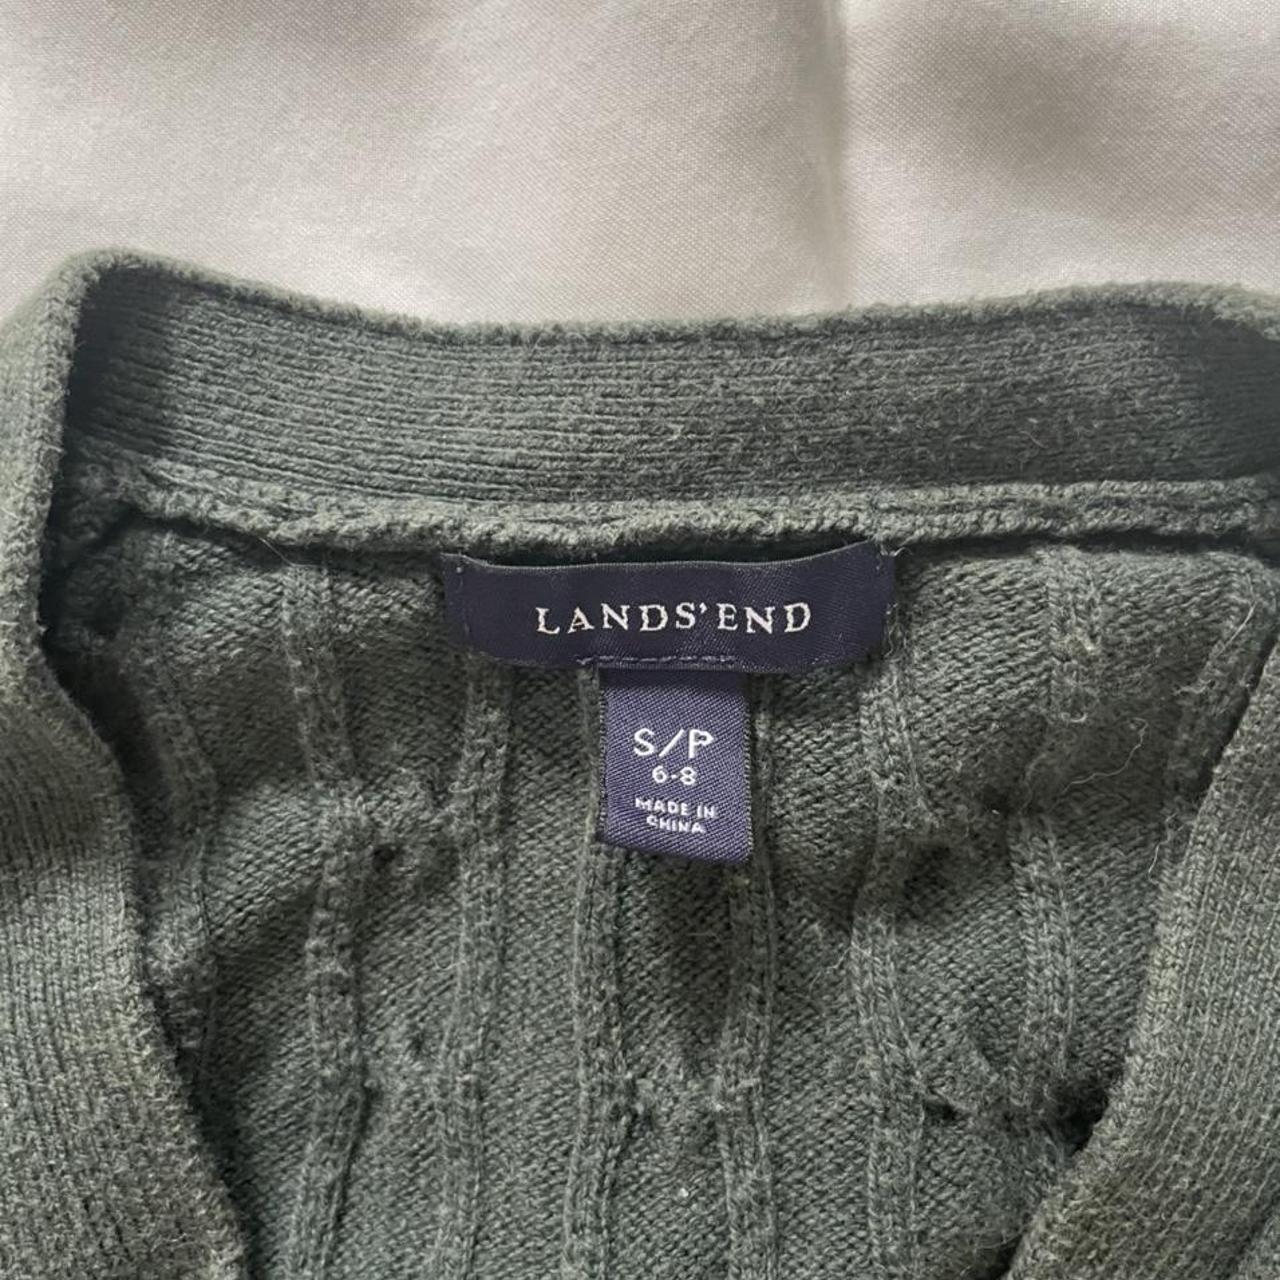 Cozy landsend forest green wool cardigan! I thought... - Depop